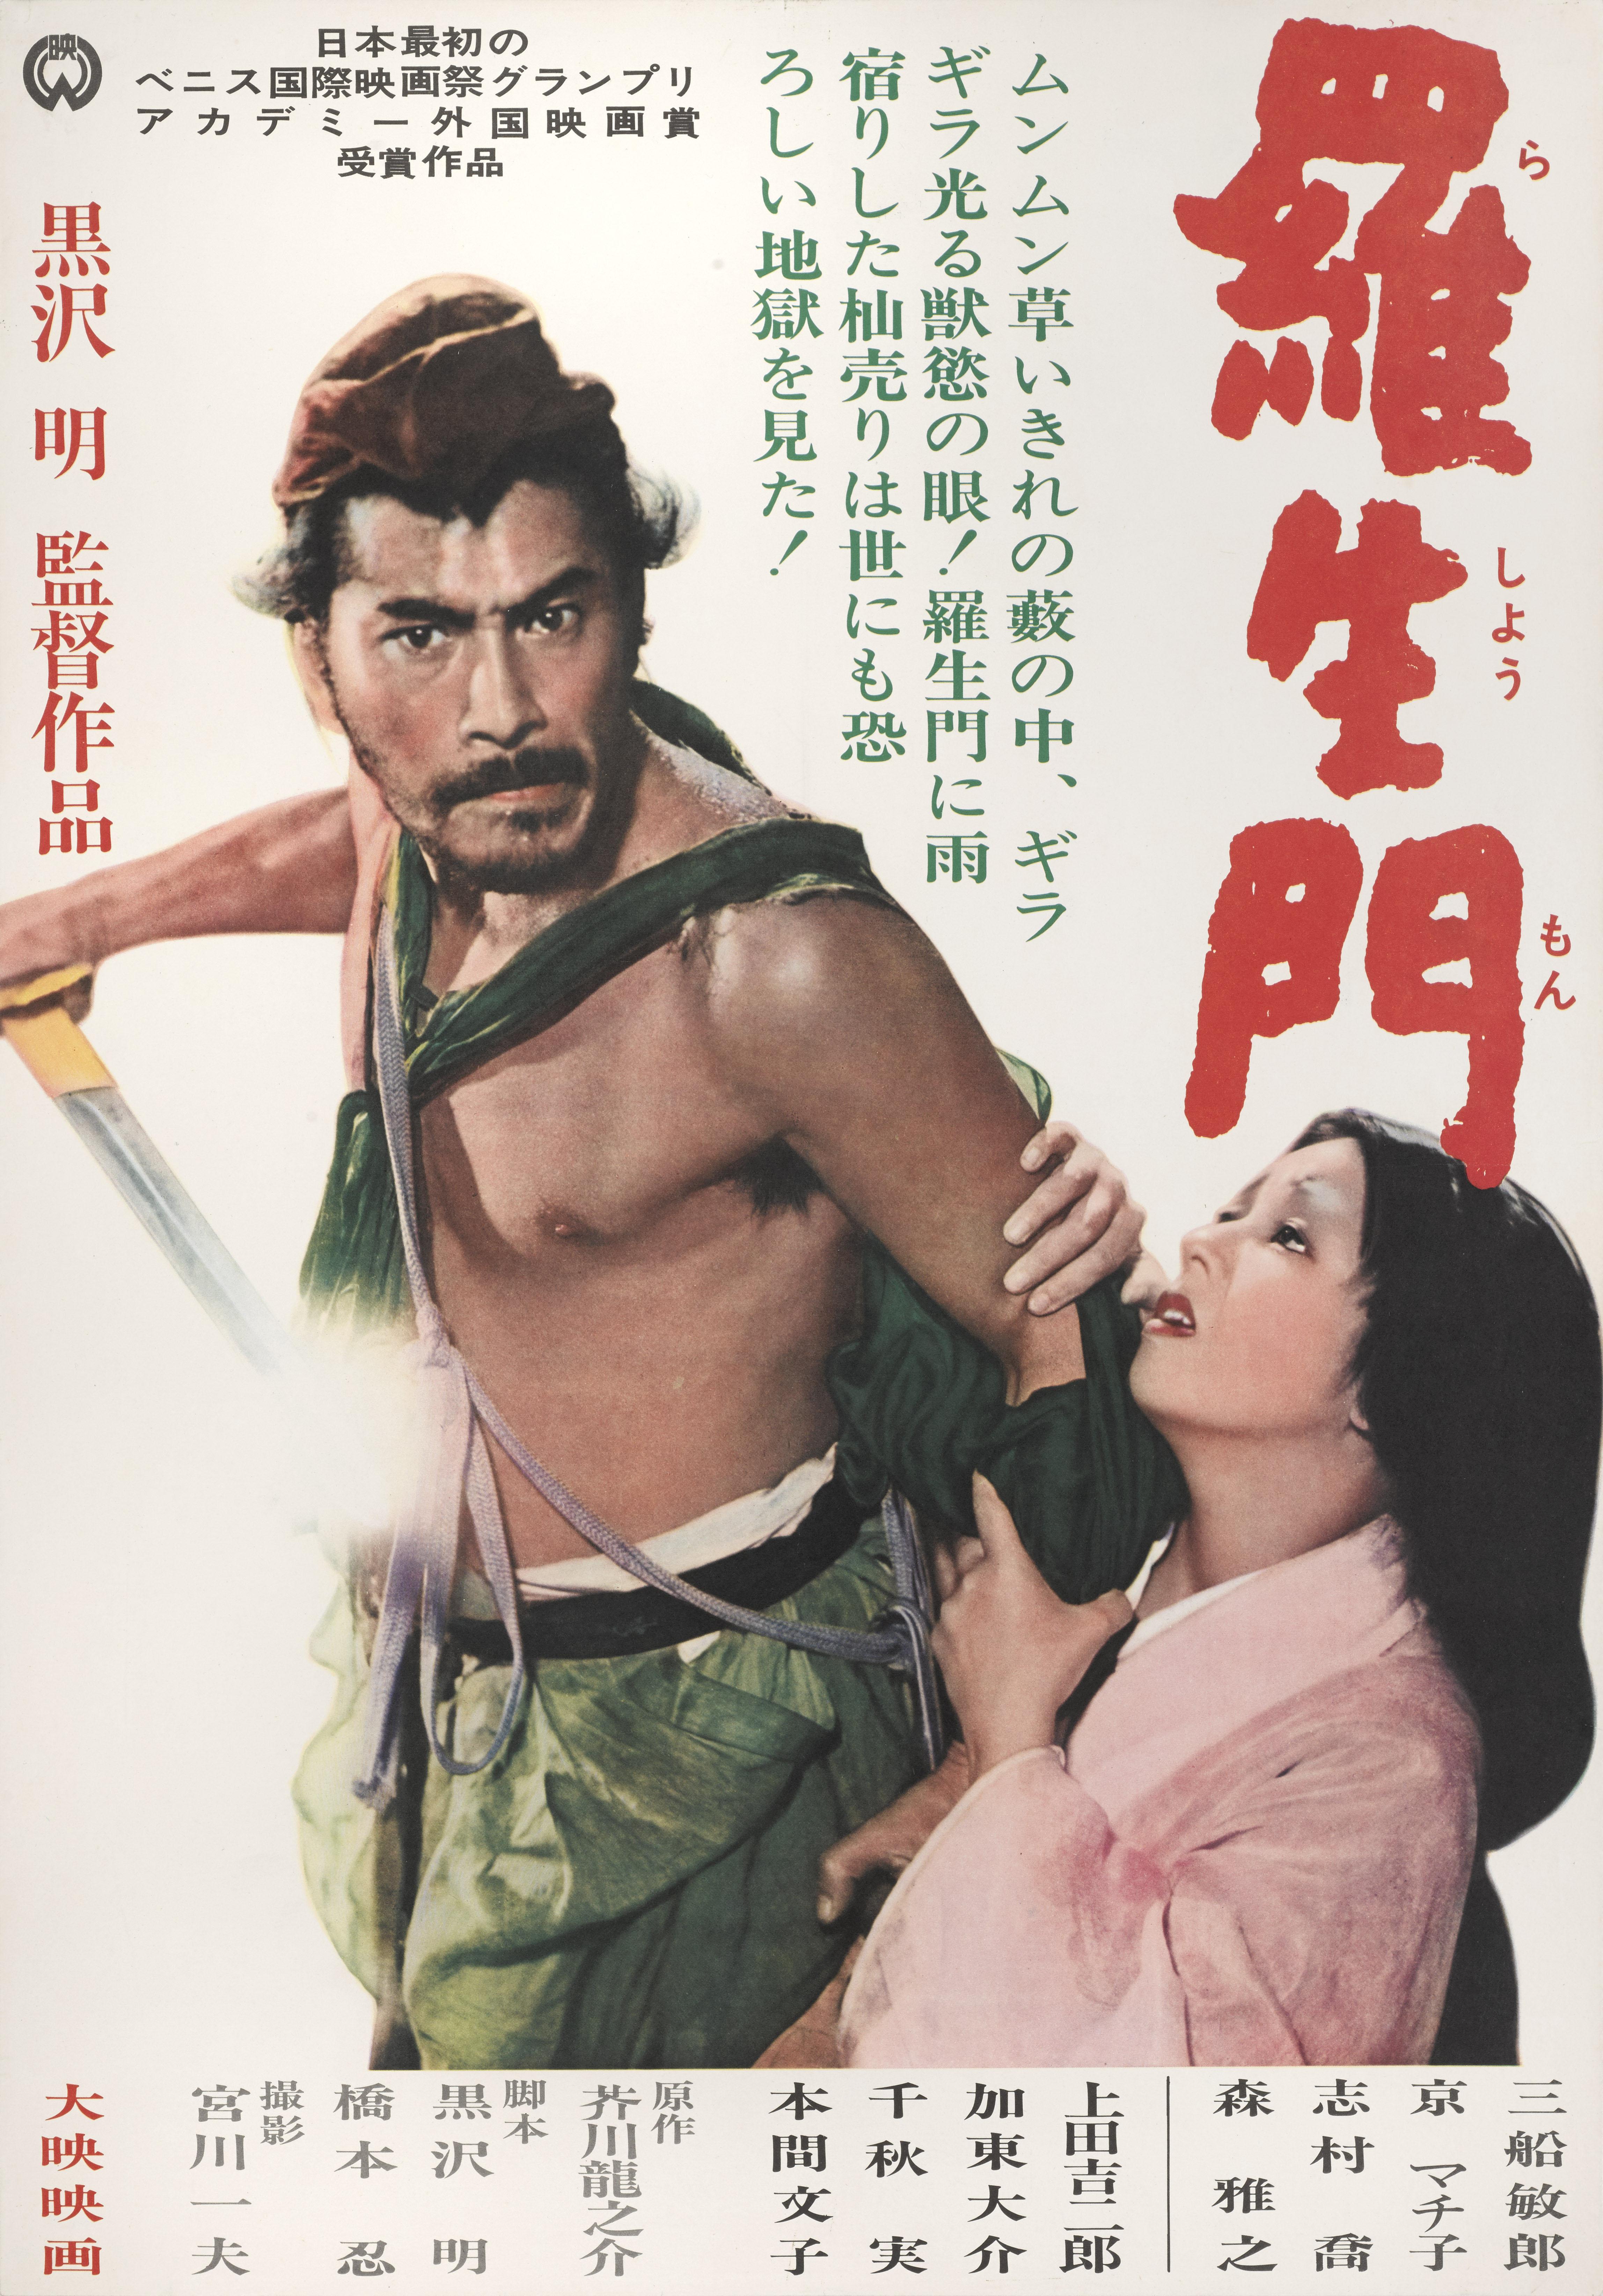 Original Japanese film poster for the 1950 clasic Akira Kurosawa crime mystery,
starring Toshiro Mifune, Machiko Kyo and Masayuki Mori.
This Japanese poster was created for the films re-release in Japan in 1962
This poster is conservation linen